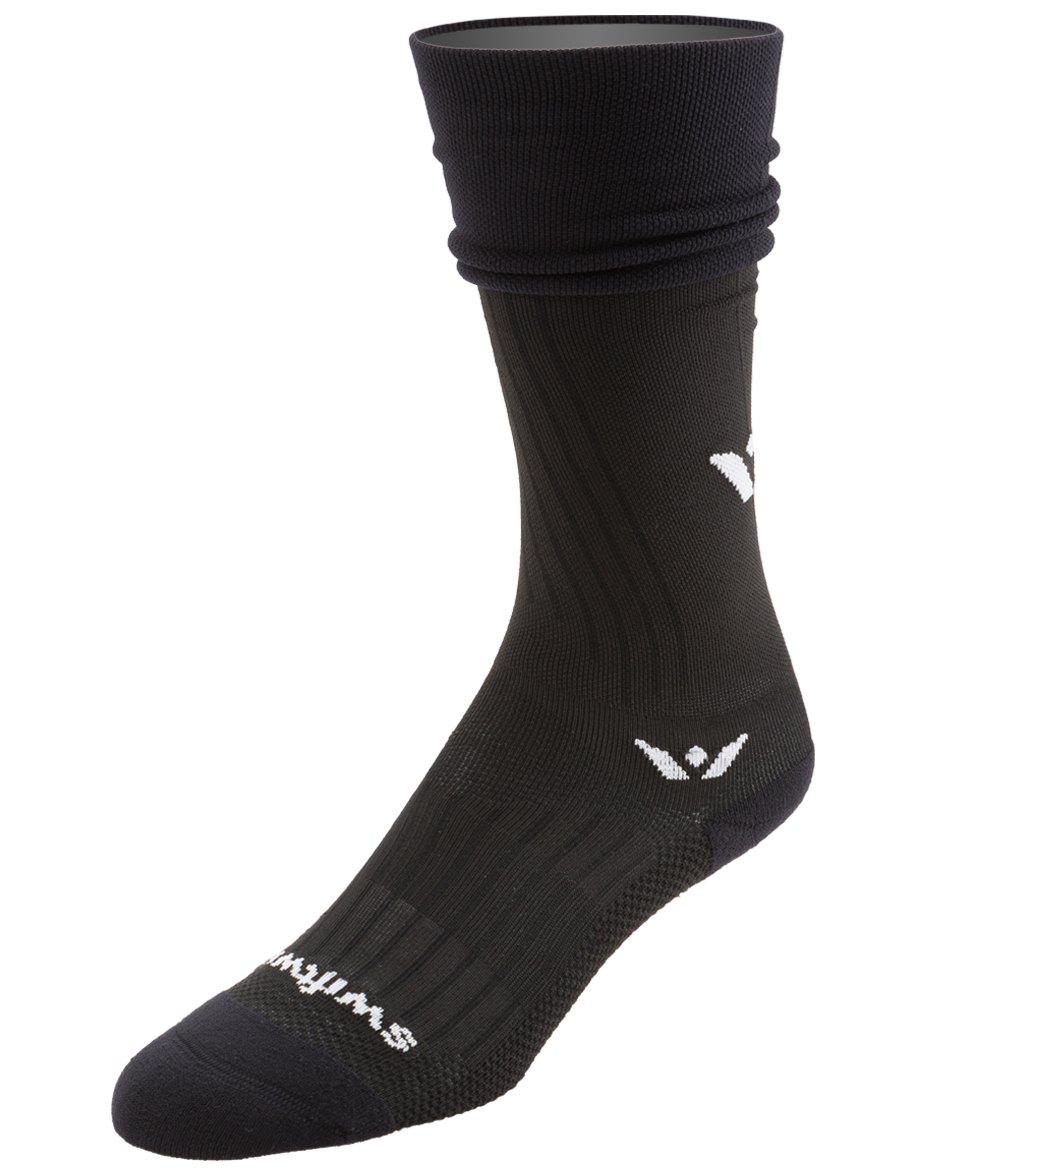 Swiftwick Performance 12 In Cuff Sock - Black Large - Swimoutlet.com